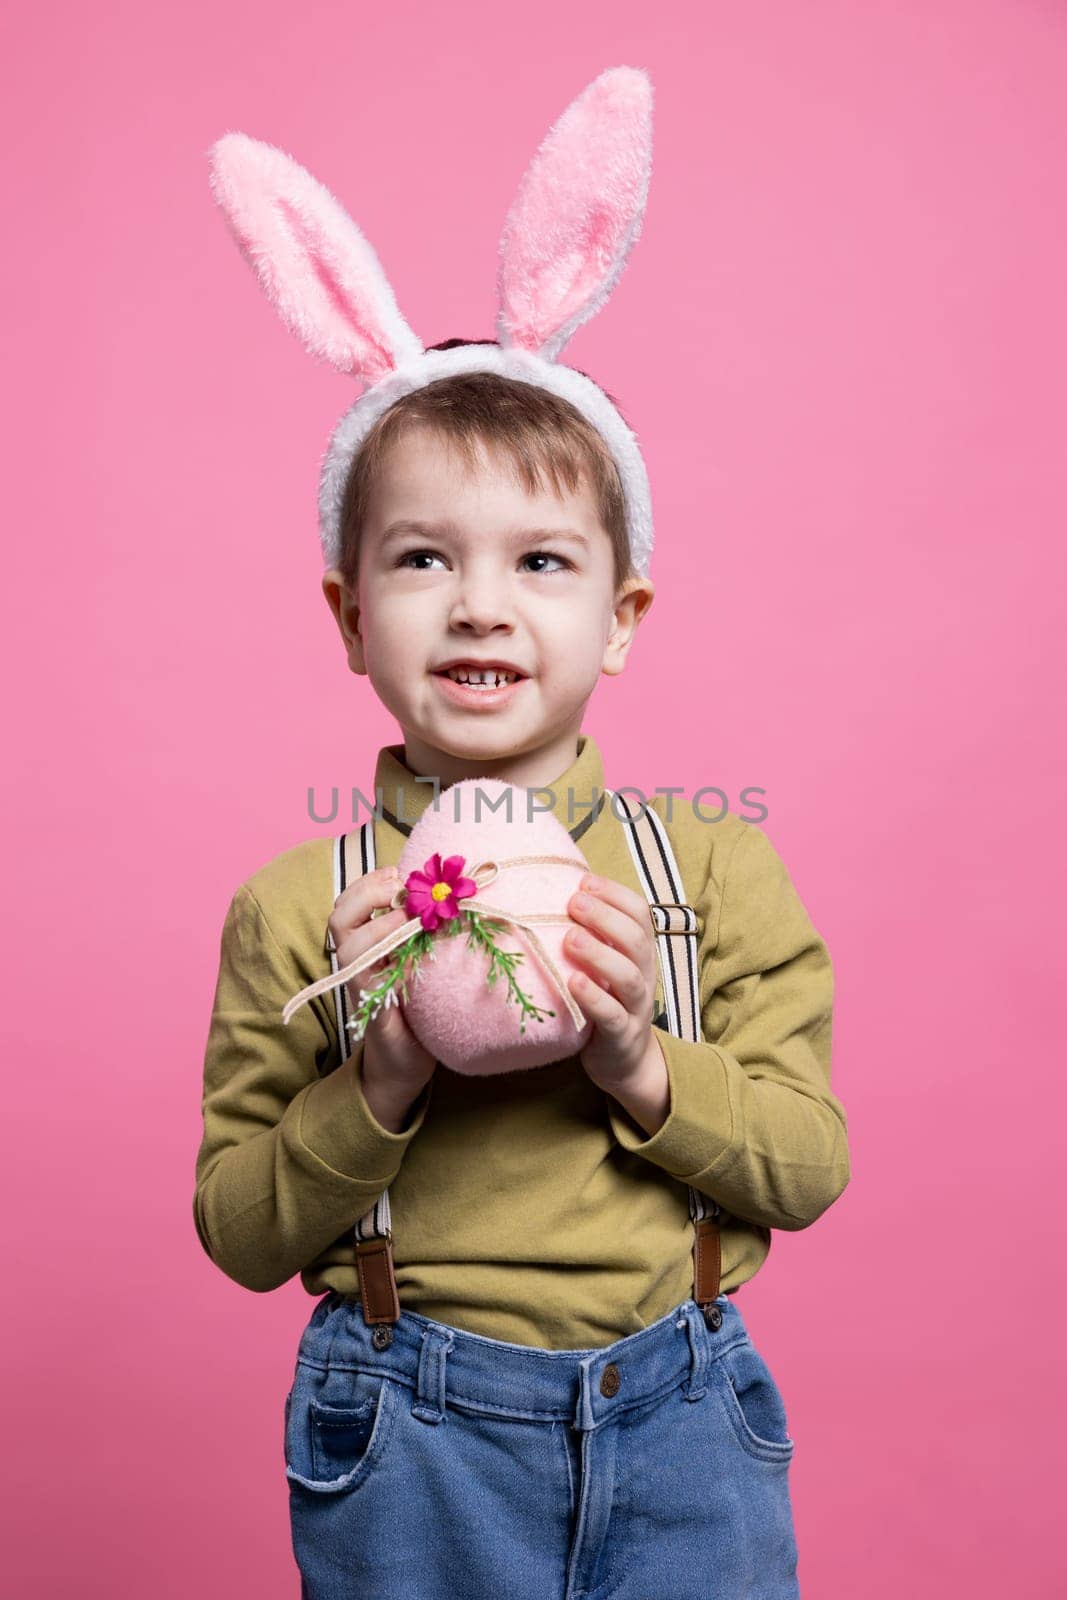 Joyful young child showing a pink egg decorated for easter, feeling happy and excited about spring holiday event. Little cute kid holding handmade festive ornament, wearing bunny ears in studio.